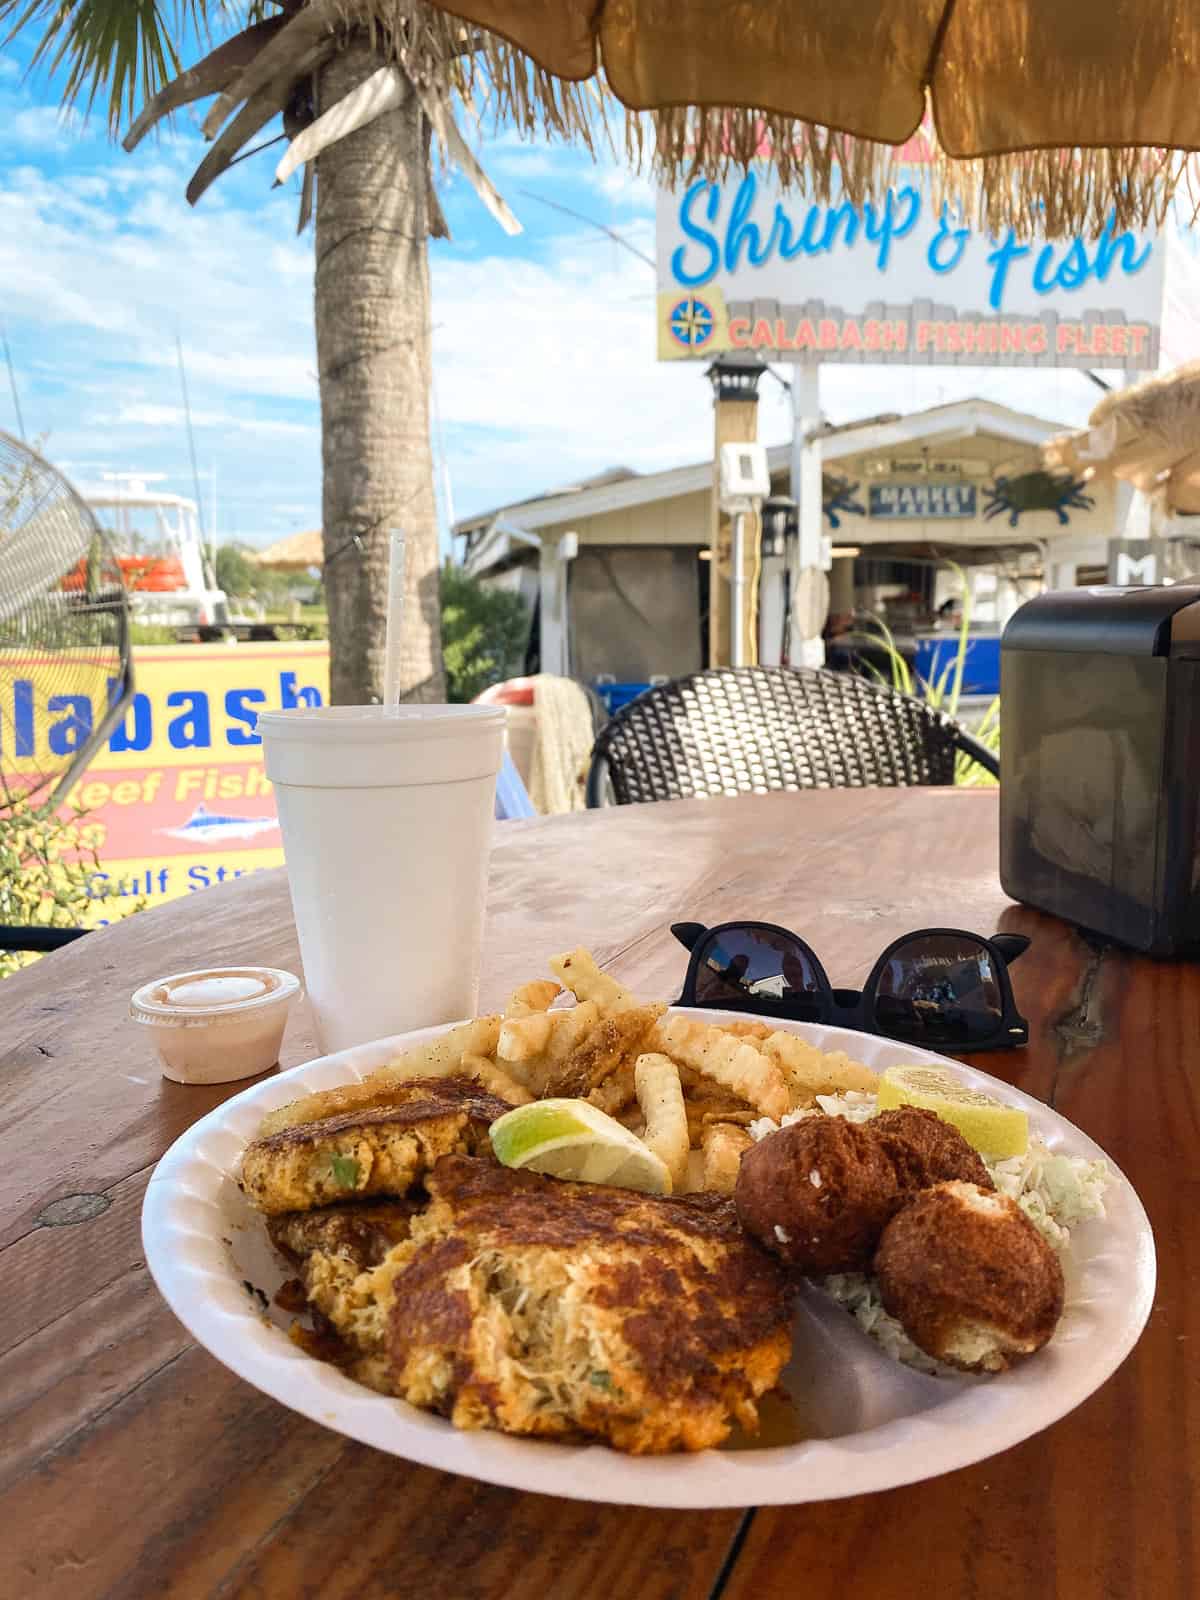 A photo of crab cakes on a paper plate at a casual outdoor seafood restaurant with palm umbrellas.